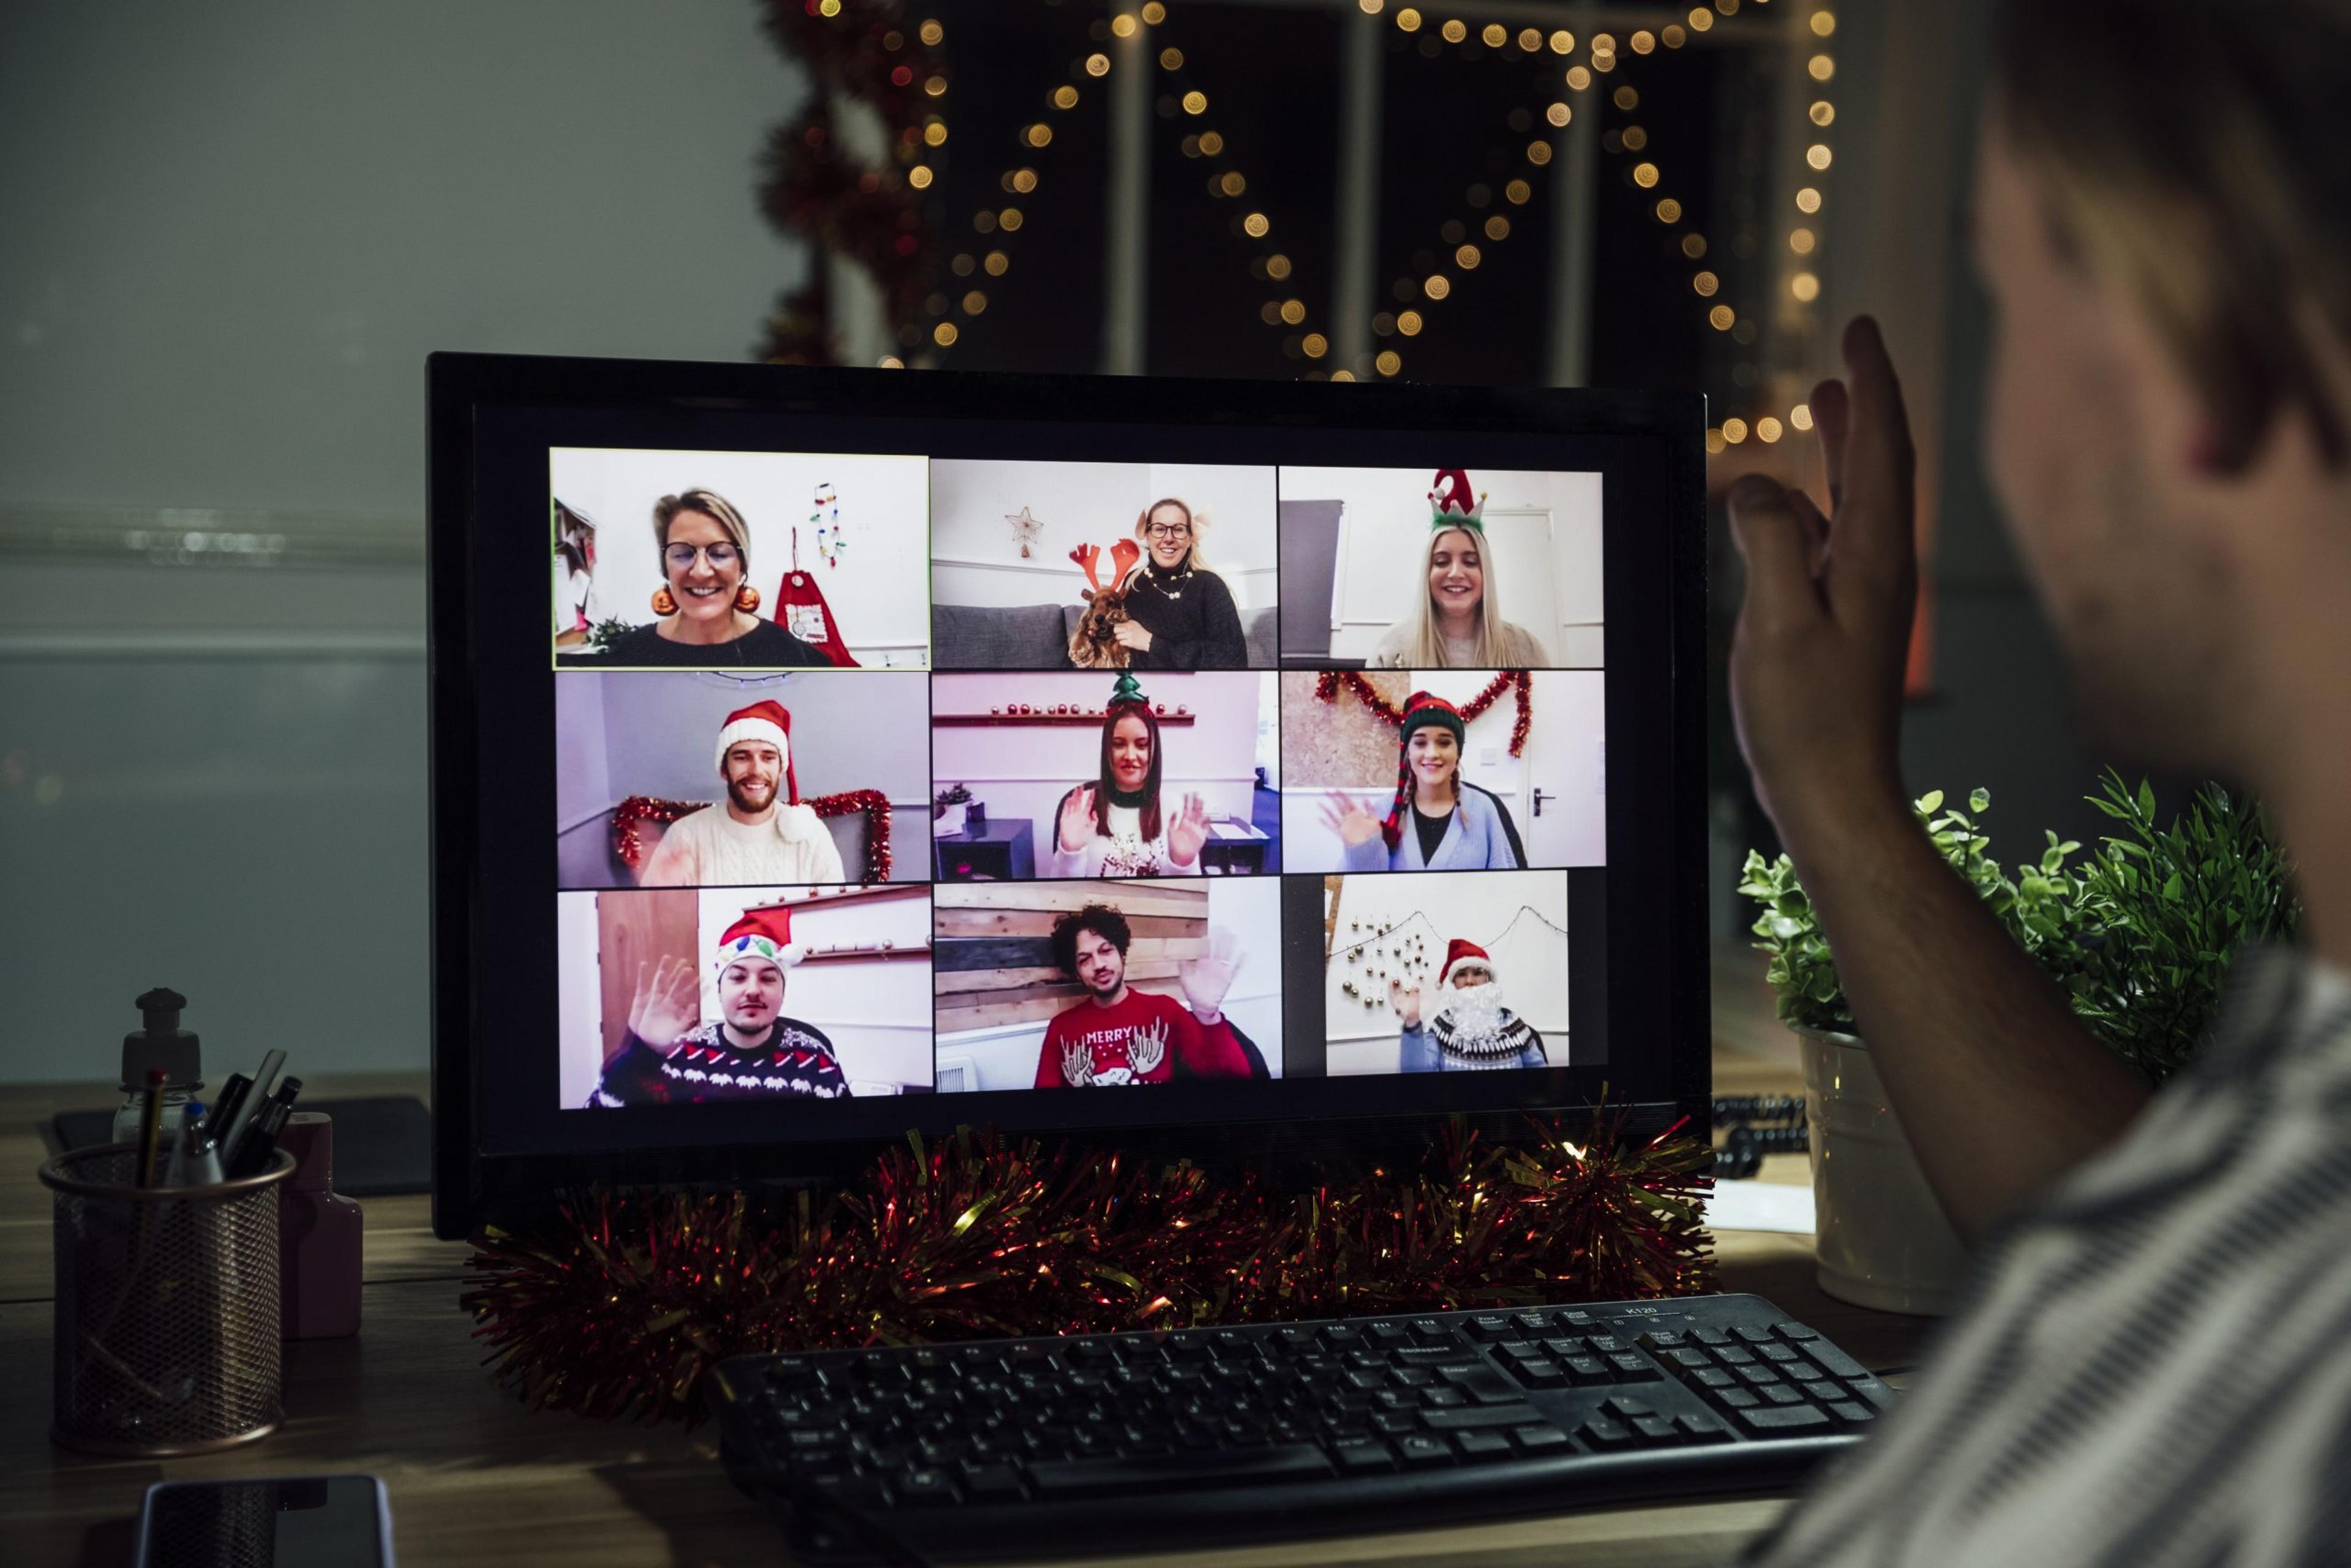 Over the shoulder view of a festive group of colleagues having an office party via video call. They are all greeting each other and chatting whilst wearing festive clothing. A man is sitting at his computer having to the screen.